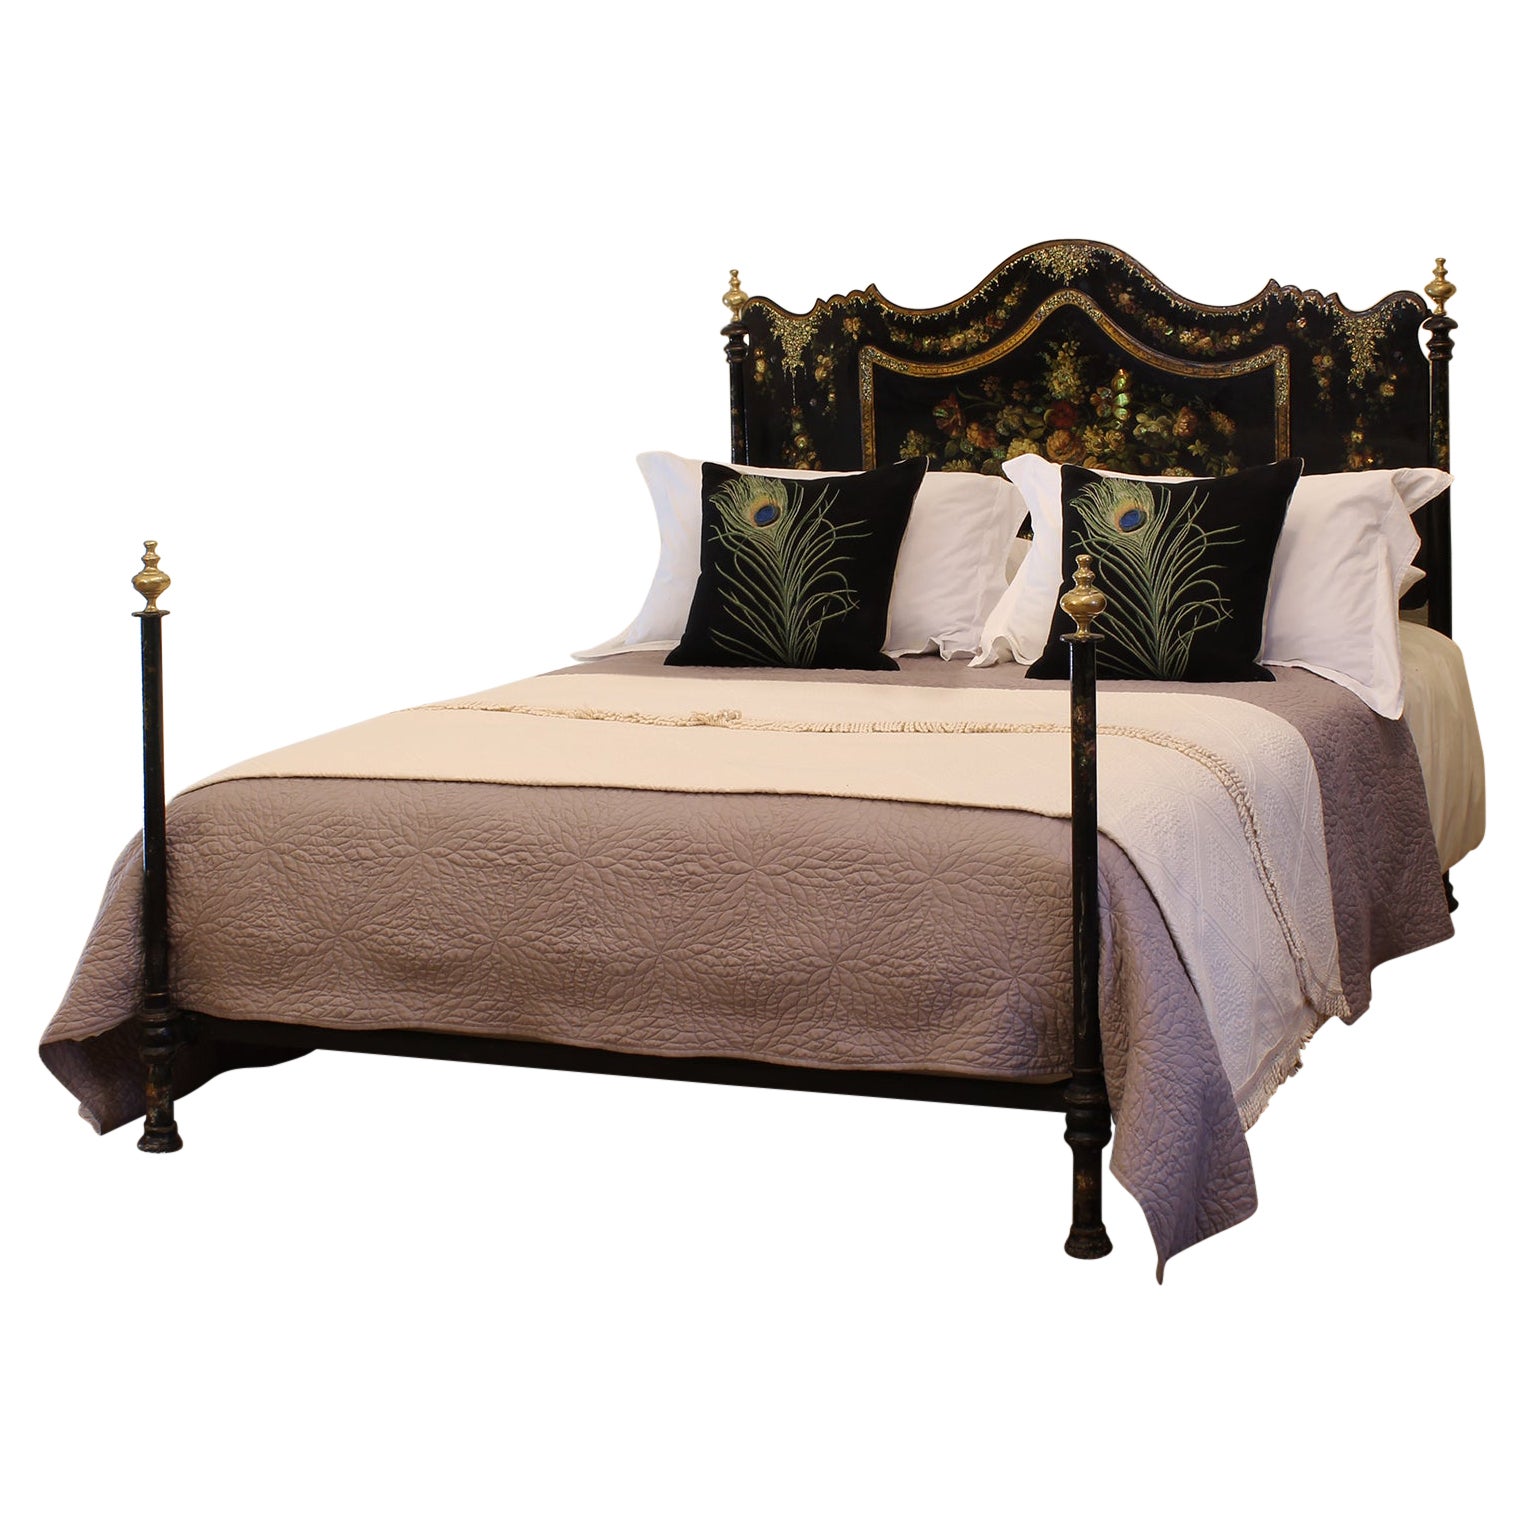 Ebony Painted Mother of Pearl Antique Bed WK162